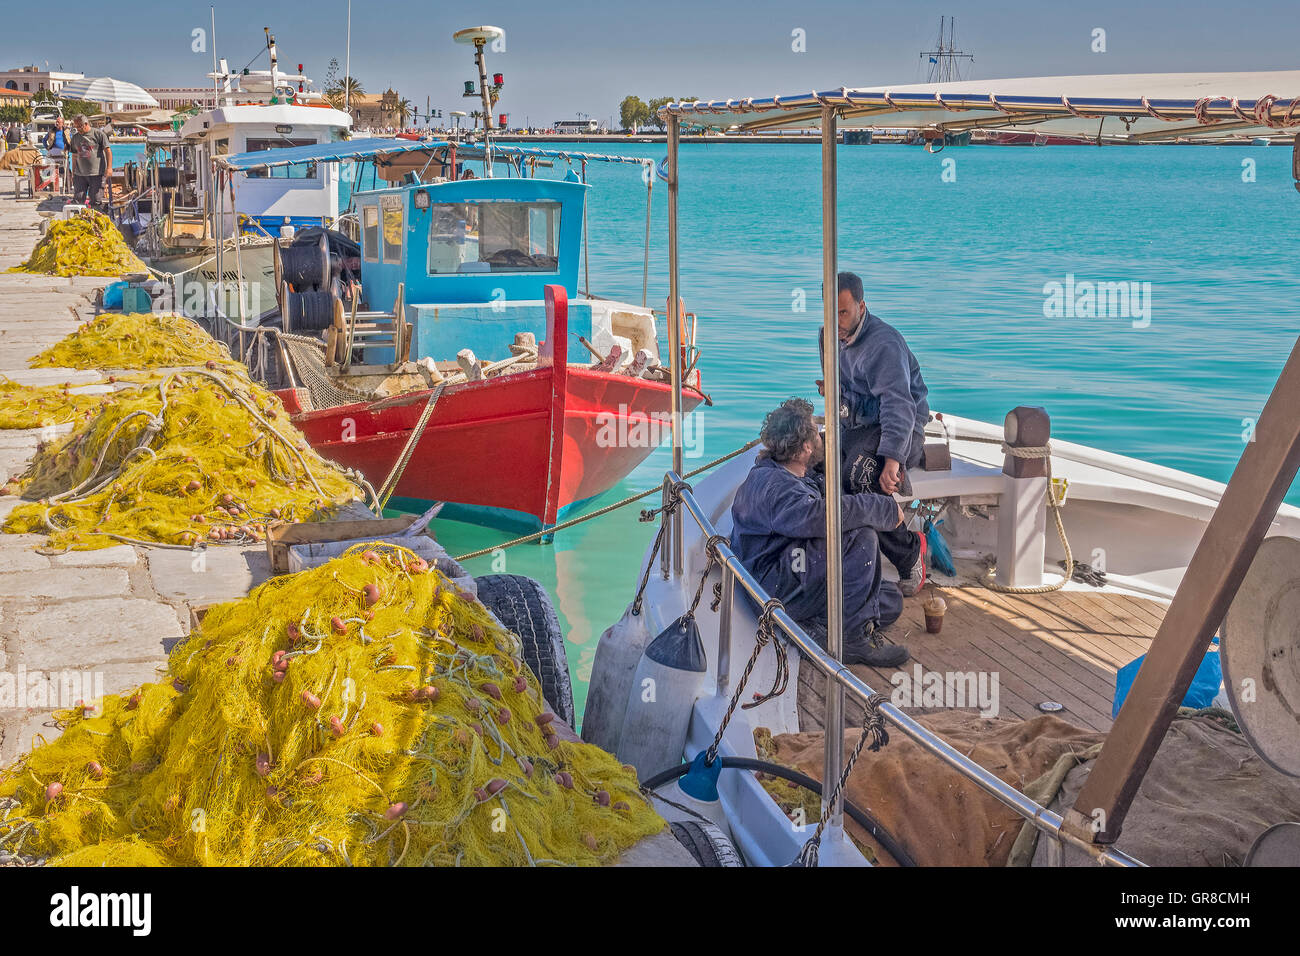 Fishing Boat In The harbour, Zakinthos, Greece Stock Photo